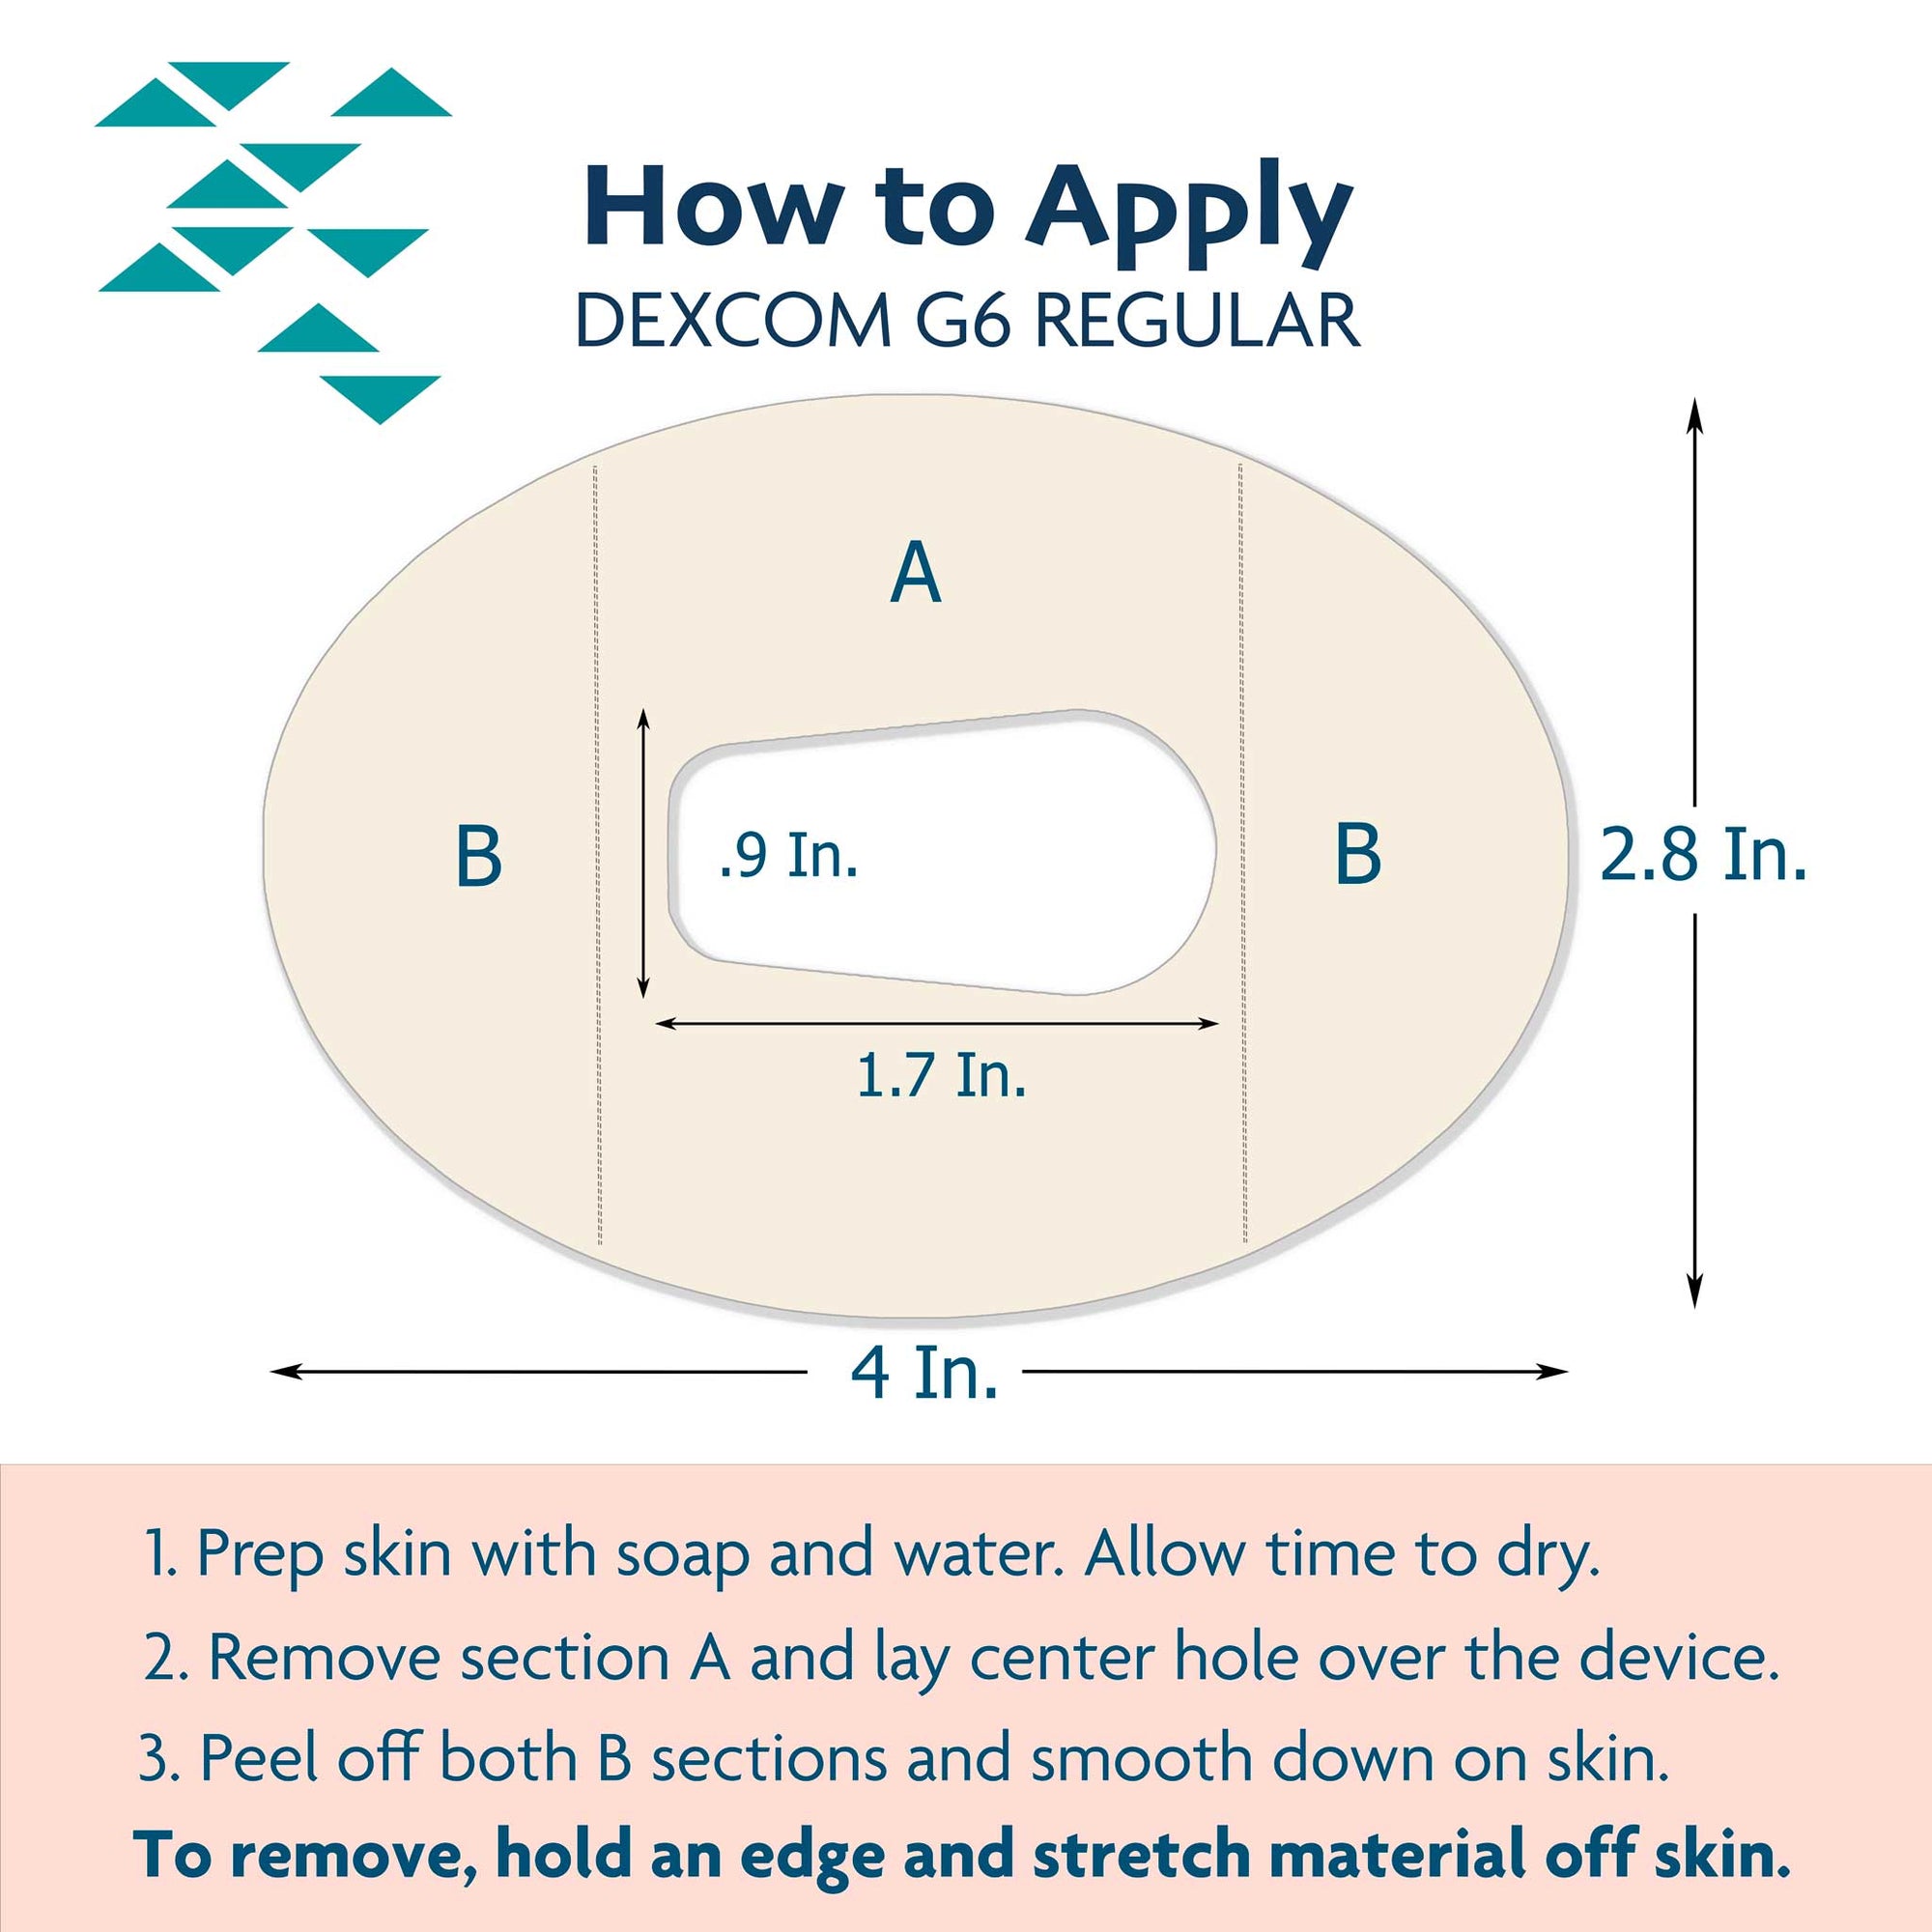 Tutorial and tips for Dexcom G6 CGM patch proper application